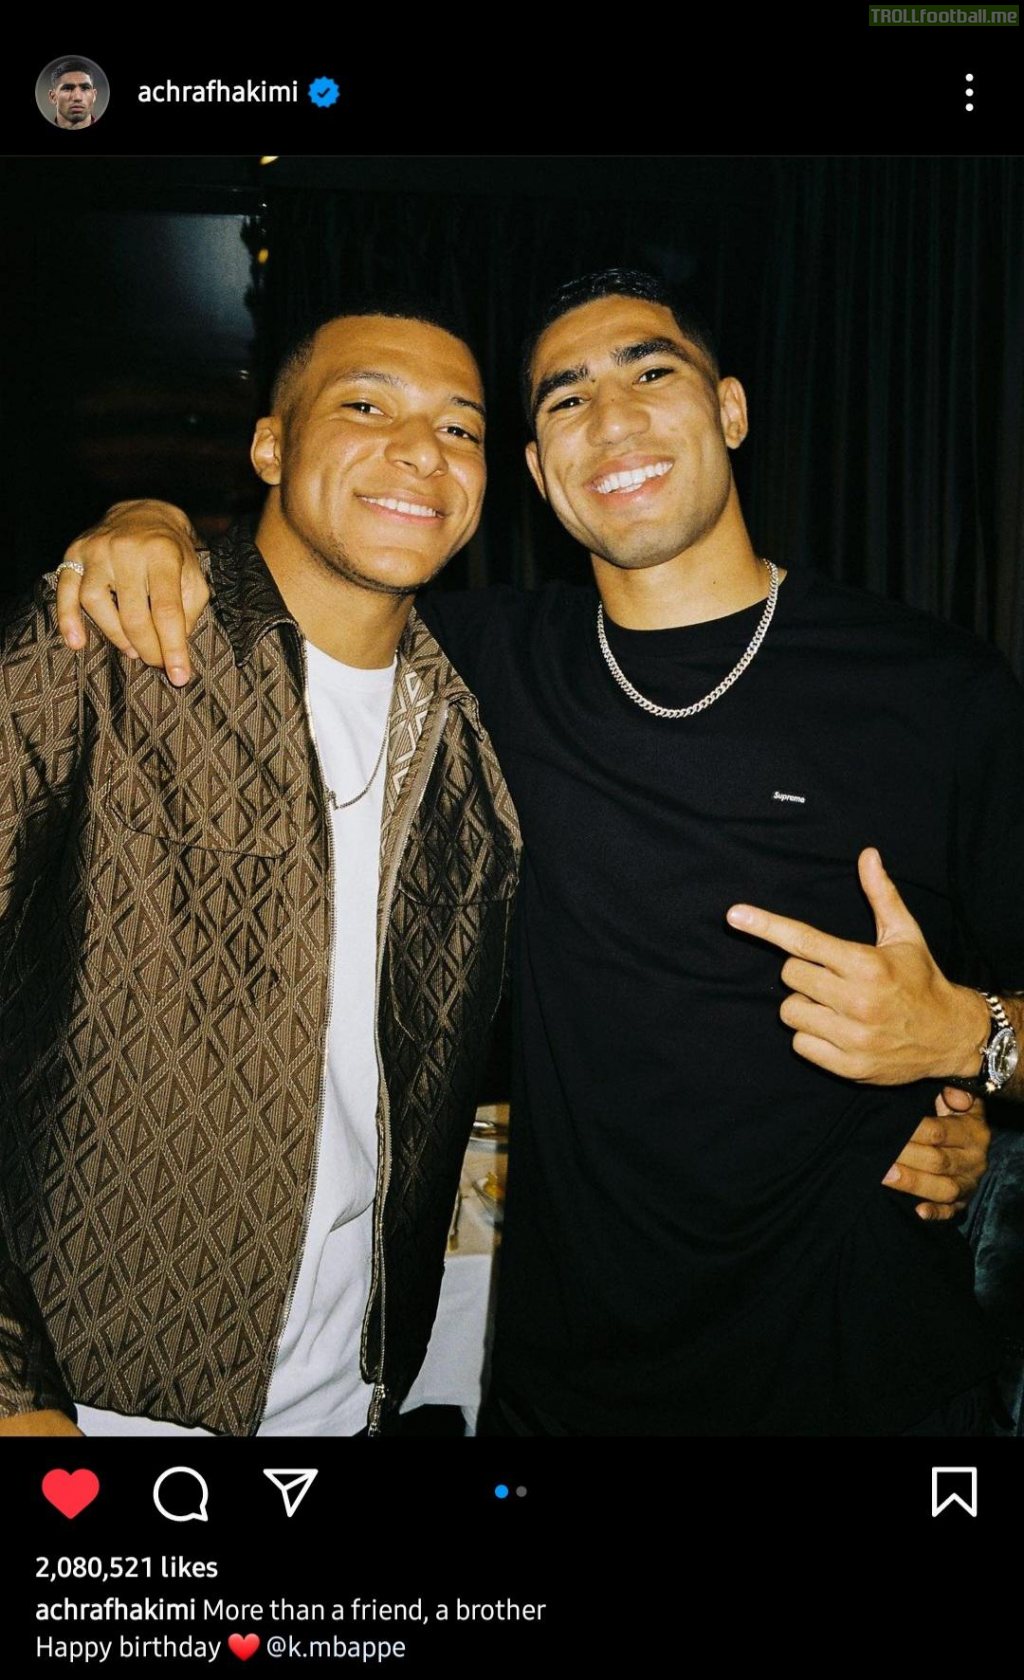 [Achraf Hakimi, via Instagram] More than a friend, a brother. Happy Birthday Mbappe